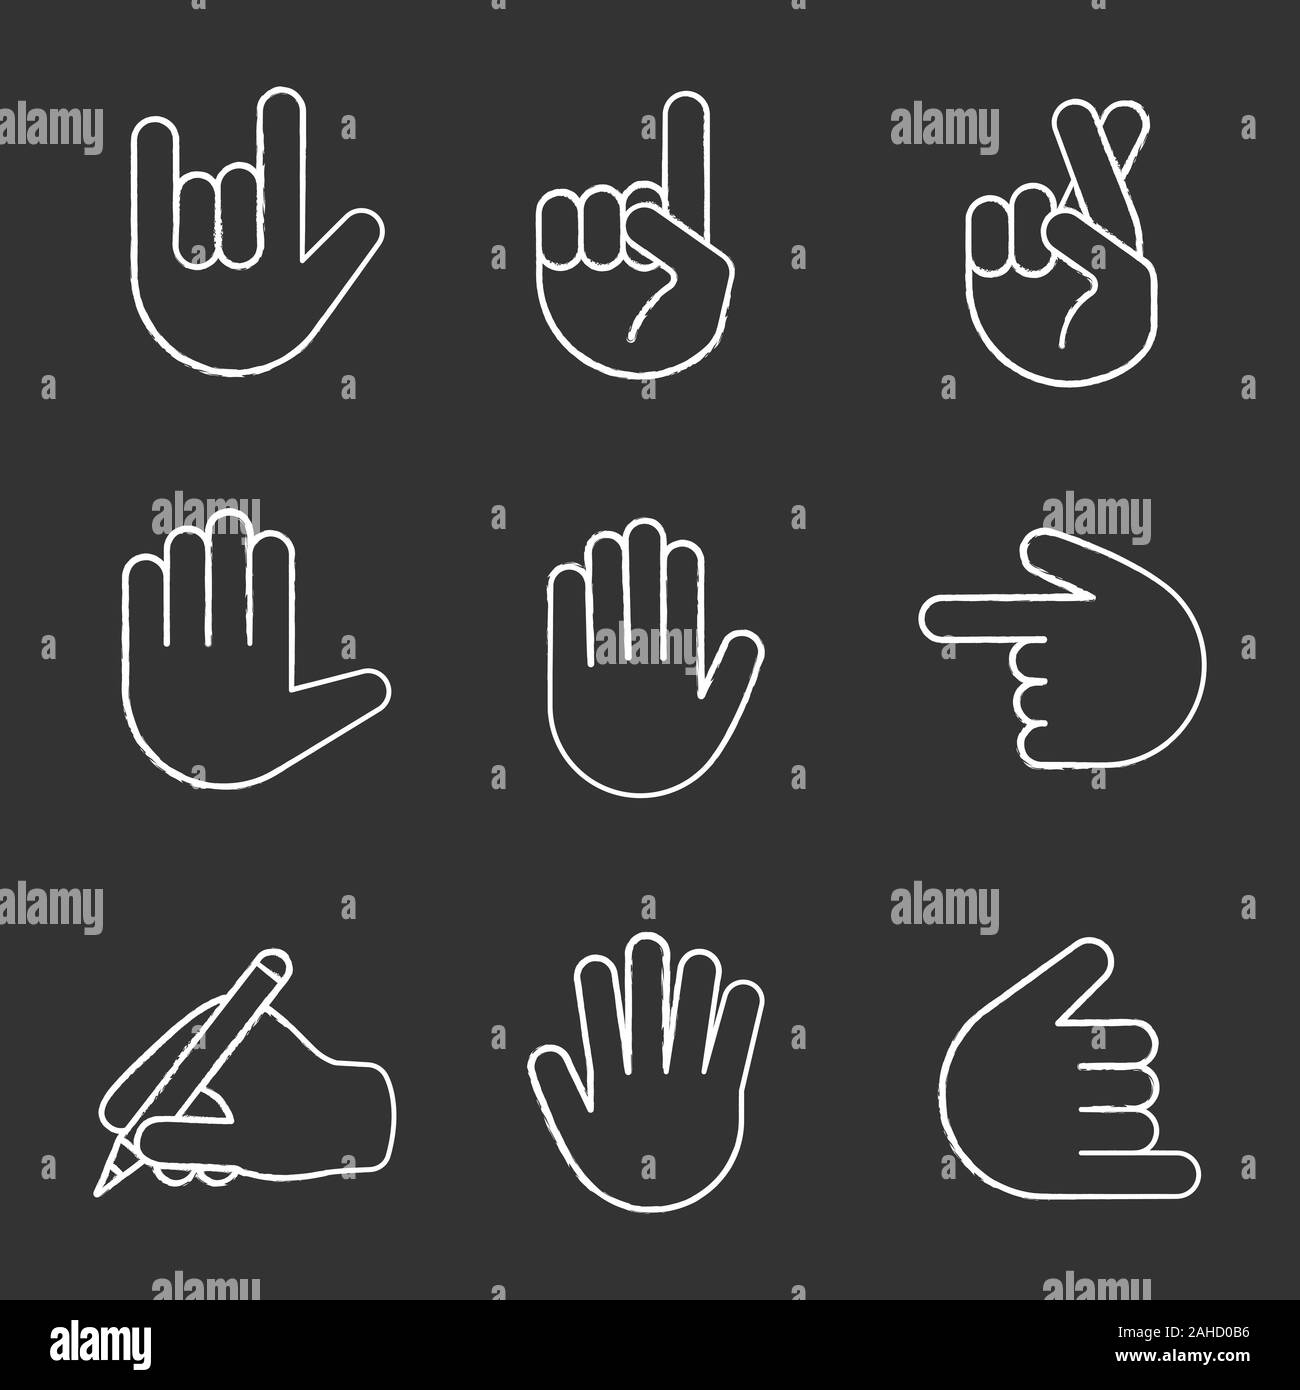 Hand Gesture Emojis Chalk Icons Set Love You Rock On Backhand Index Pointing Left And Up Luck High Five Counting Five Shaka Gesturing Writing Stock Vector Image Art Alamy